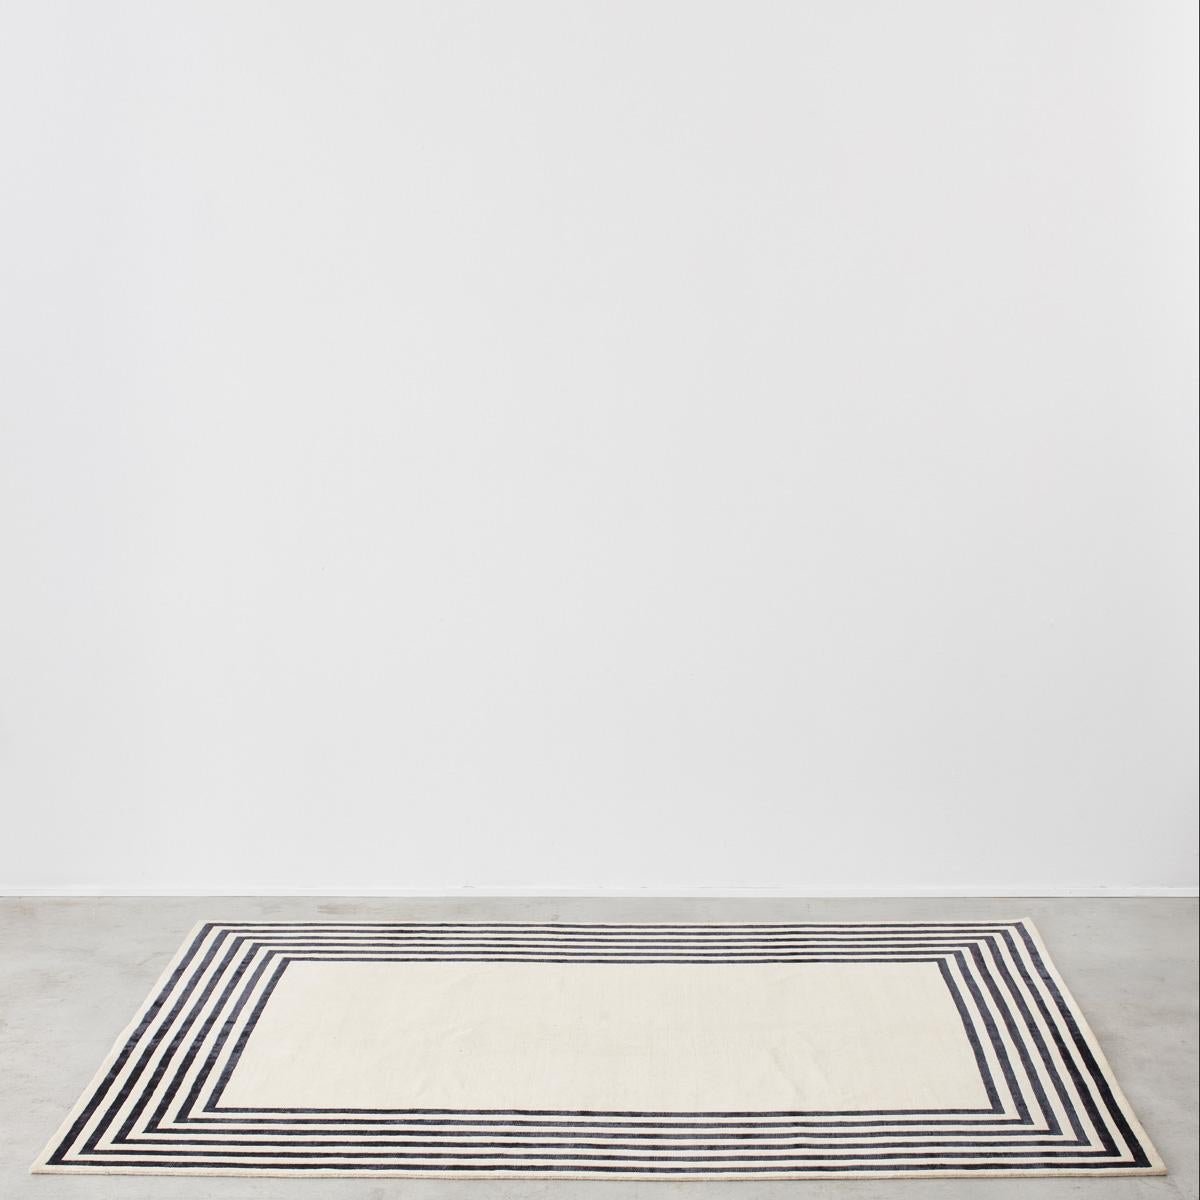 Contemporary Black and White Geometric Carpet in Wool and Viscose, Unknown, Italy, 2000s